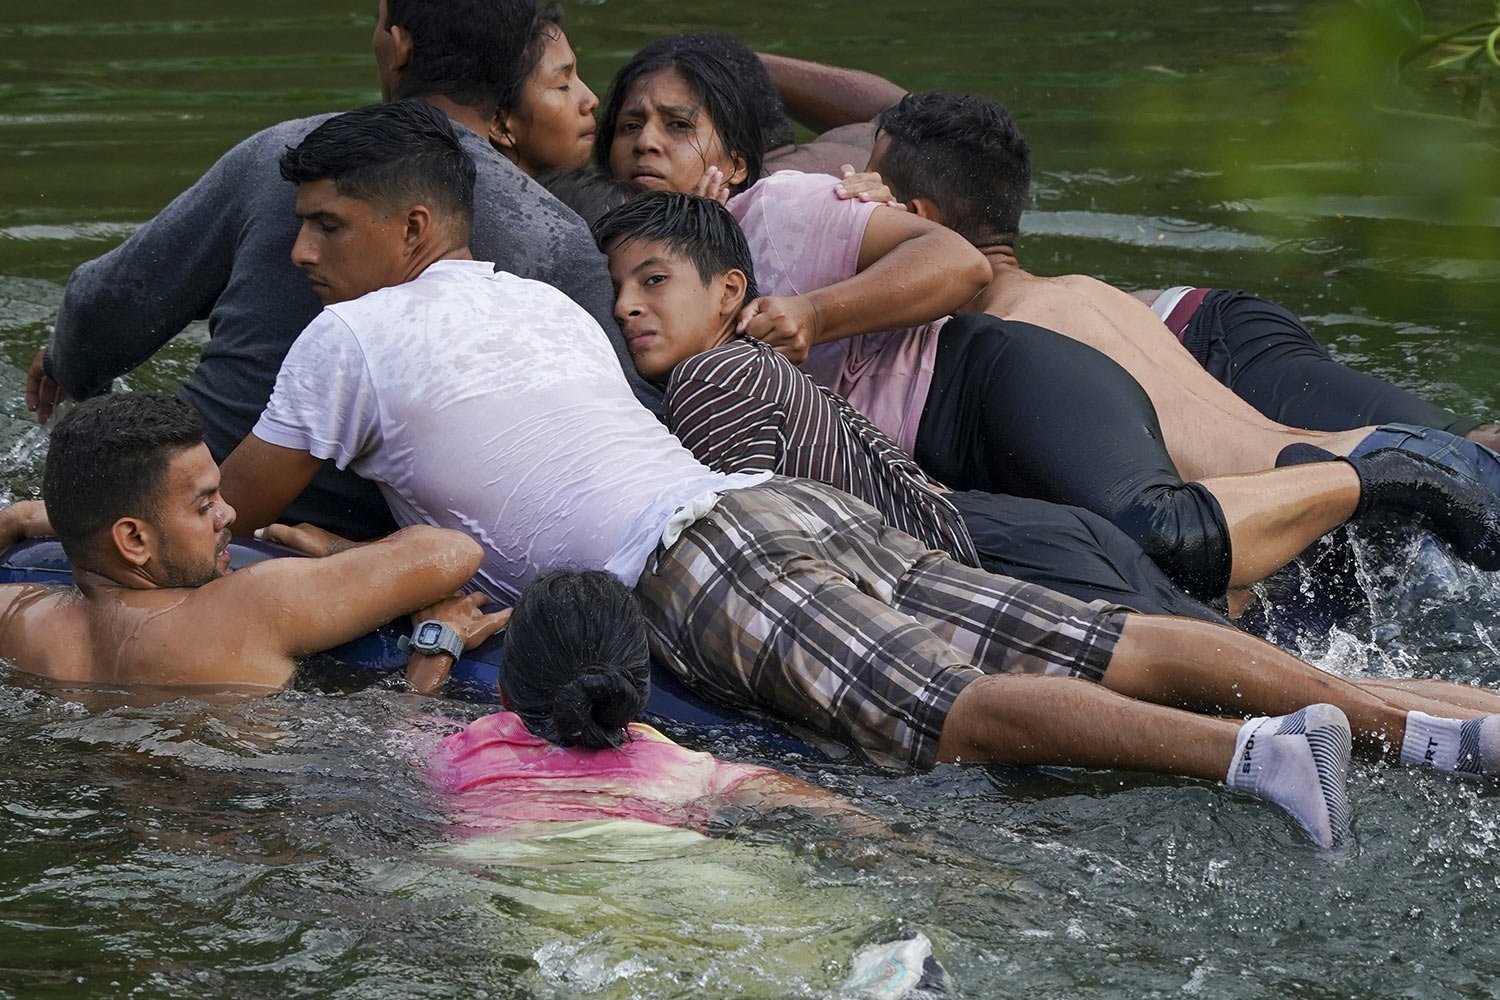  Migrants cross the Rio Grande river on an inflatable mattress into the U.S. from Matamoros, Mexico, May 9, 2023. The U.S. ended on May 11 the Title 42 policy, linked to the coronavirus pandemic that allowed it to quickly expel many migrants seeking 